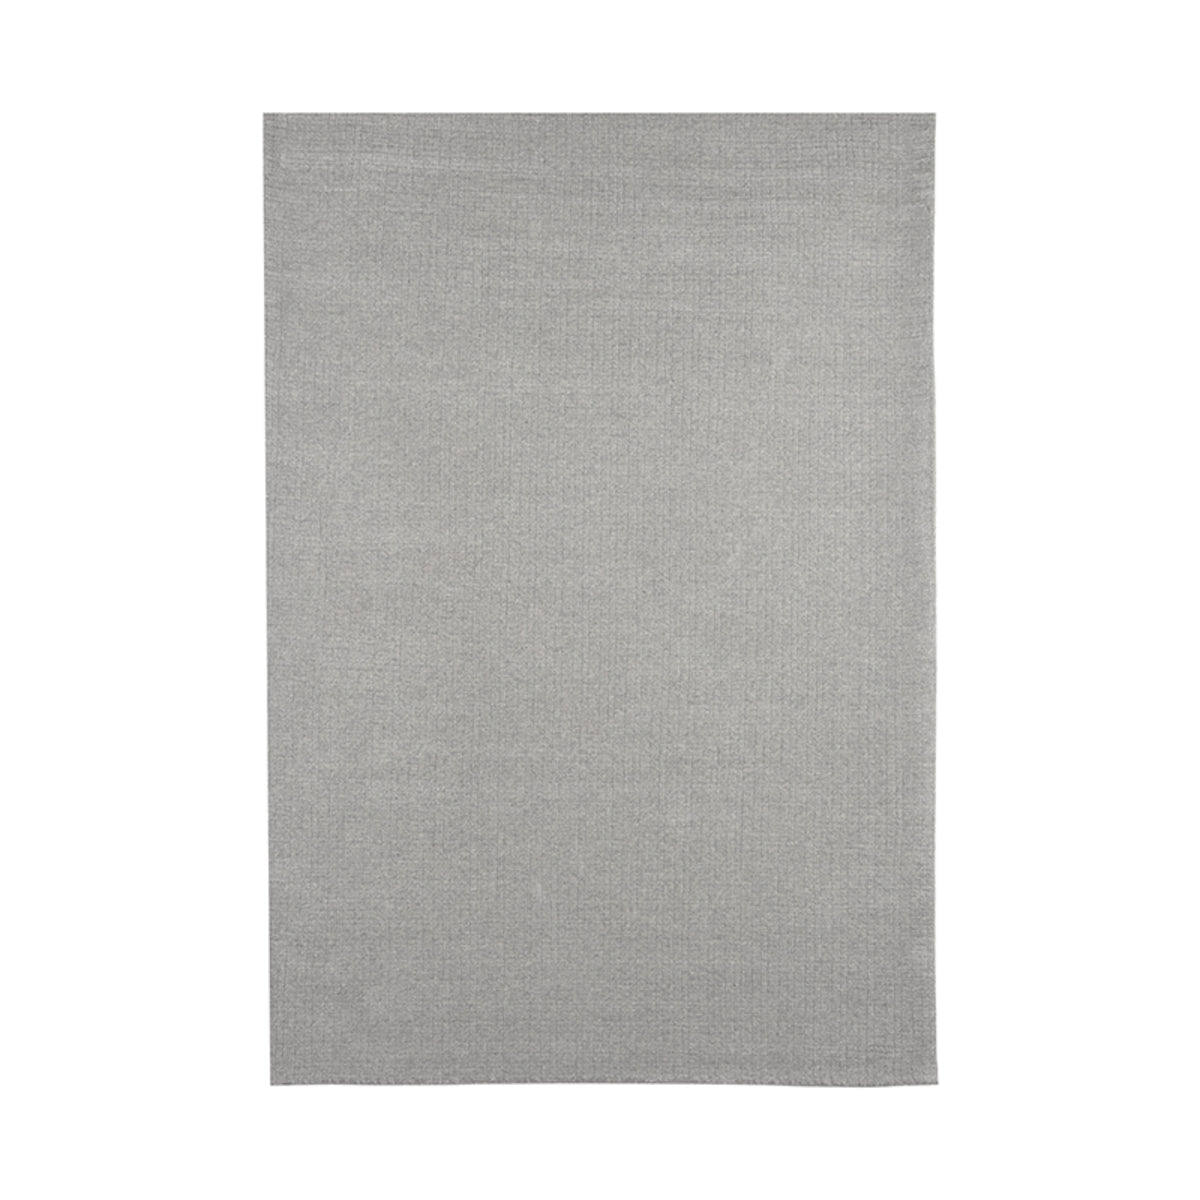 LABEL51 Rugs Wolly - Gray - Wool - 200x300 cm